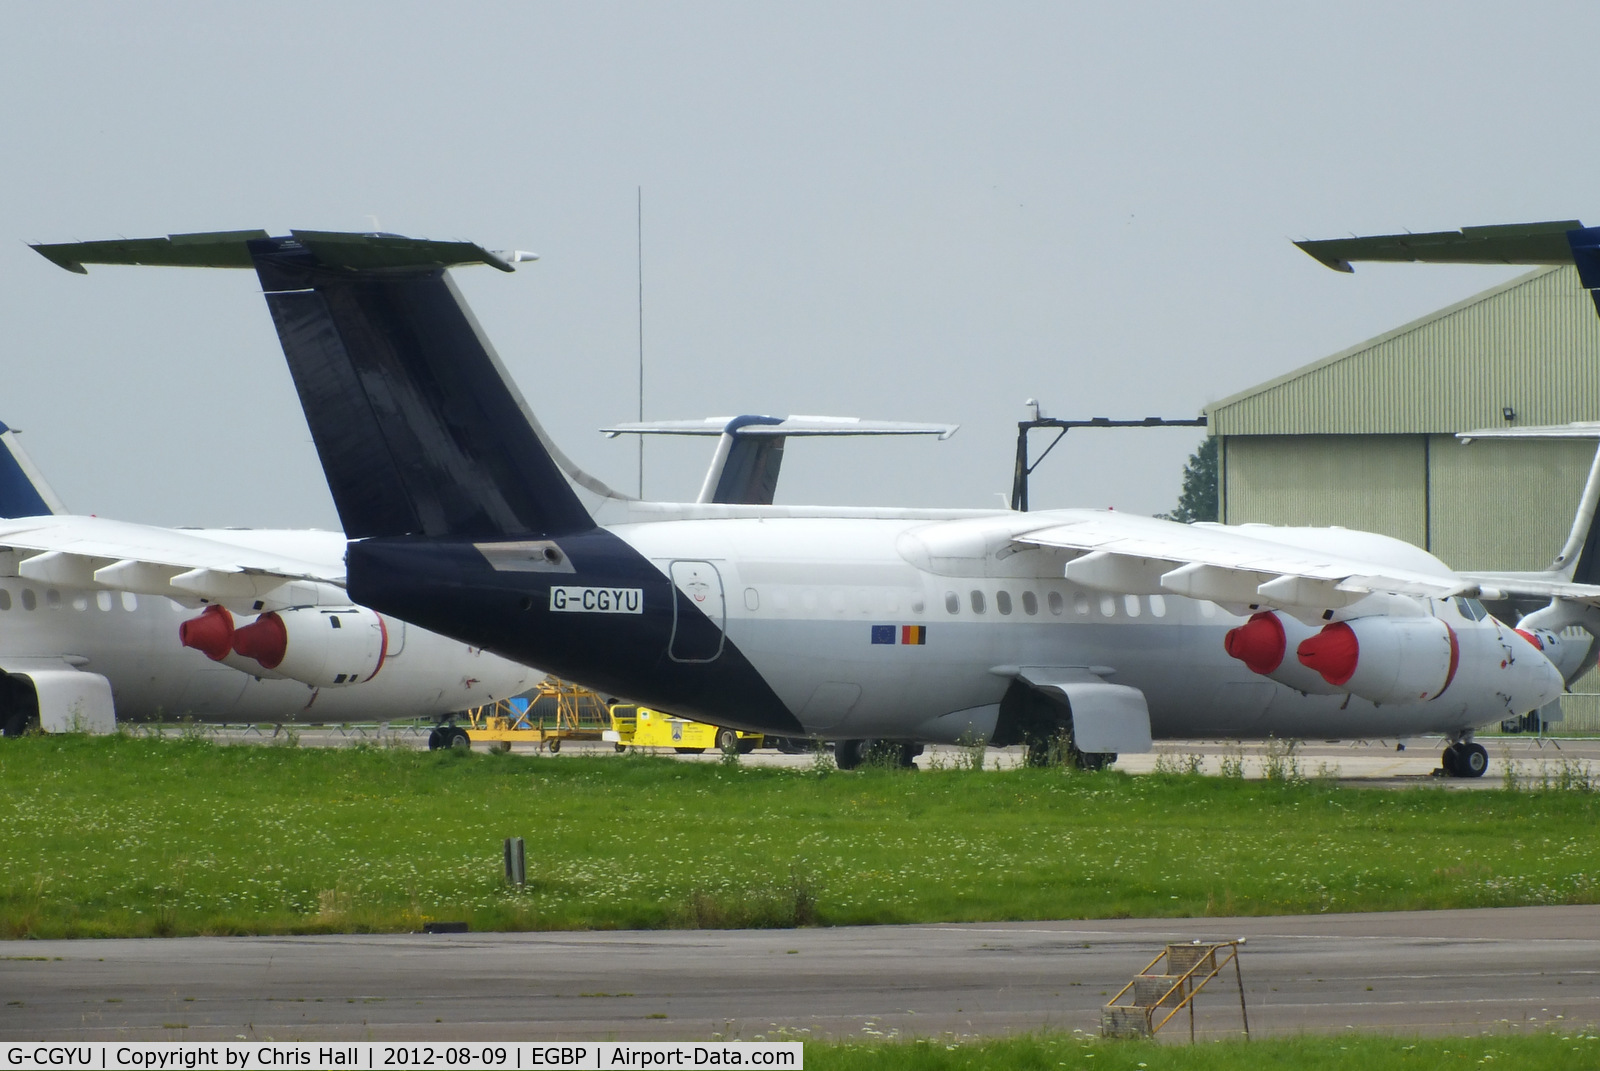 G-CGYU, 1995 British Aerospace Avro 146-RJ85 C/N E.2275, ex OO-DJN Brussels Airlines in storage at Kemble